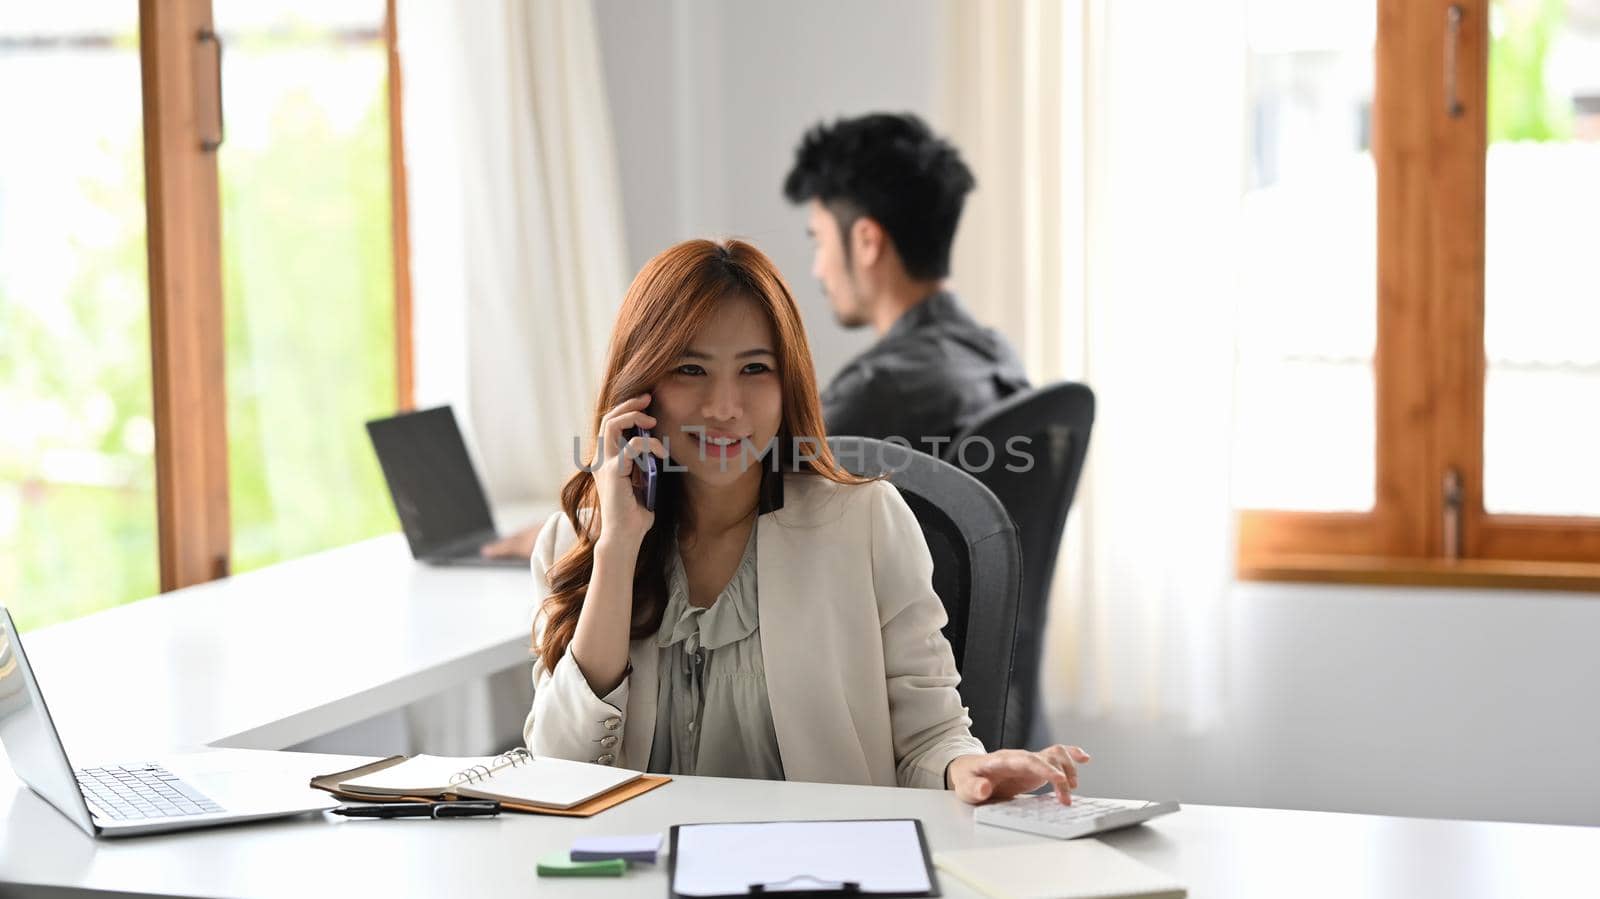 Attractive woman financial advisor having negotiations with client on mobile phone.